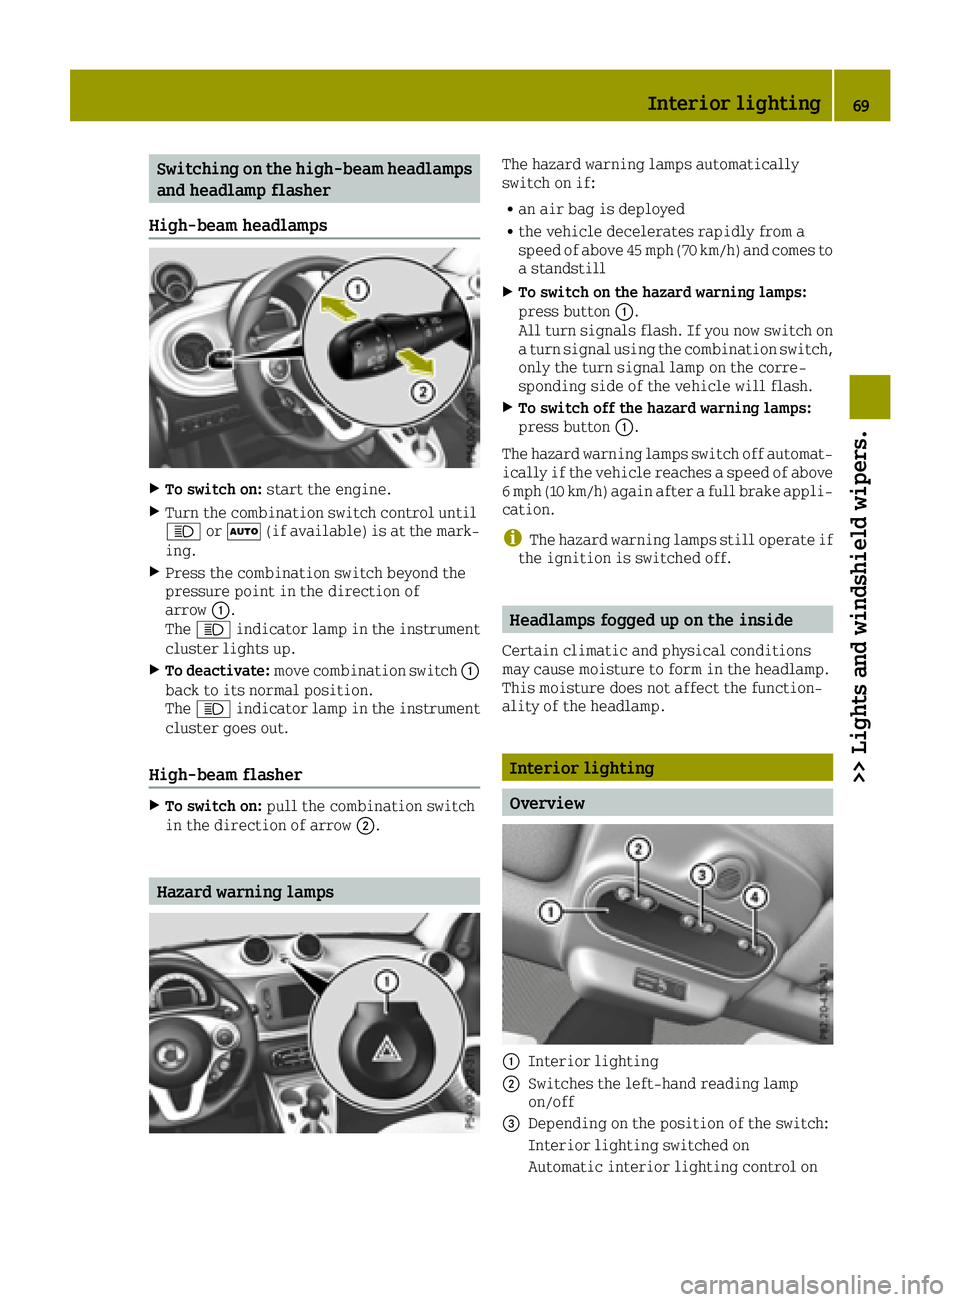 SMART FORTWO 2016 User Guide Switching on the high-beam headlamps
and headlamp flasher
High-beam headlamps
XTo switch on: start the engine.
XTurn the combination switch control until
0057or0058 (if available) is at the mark-
ing.